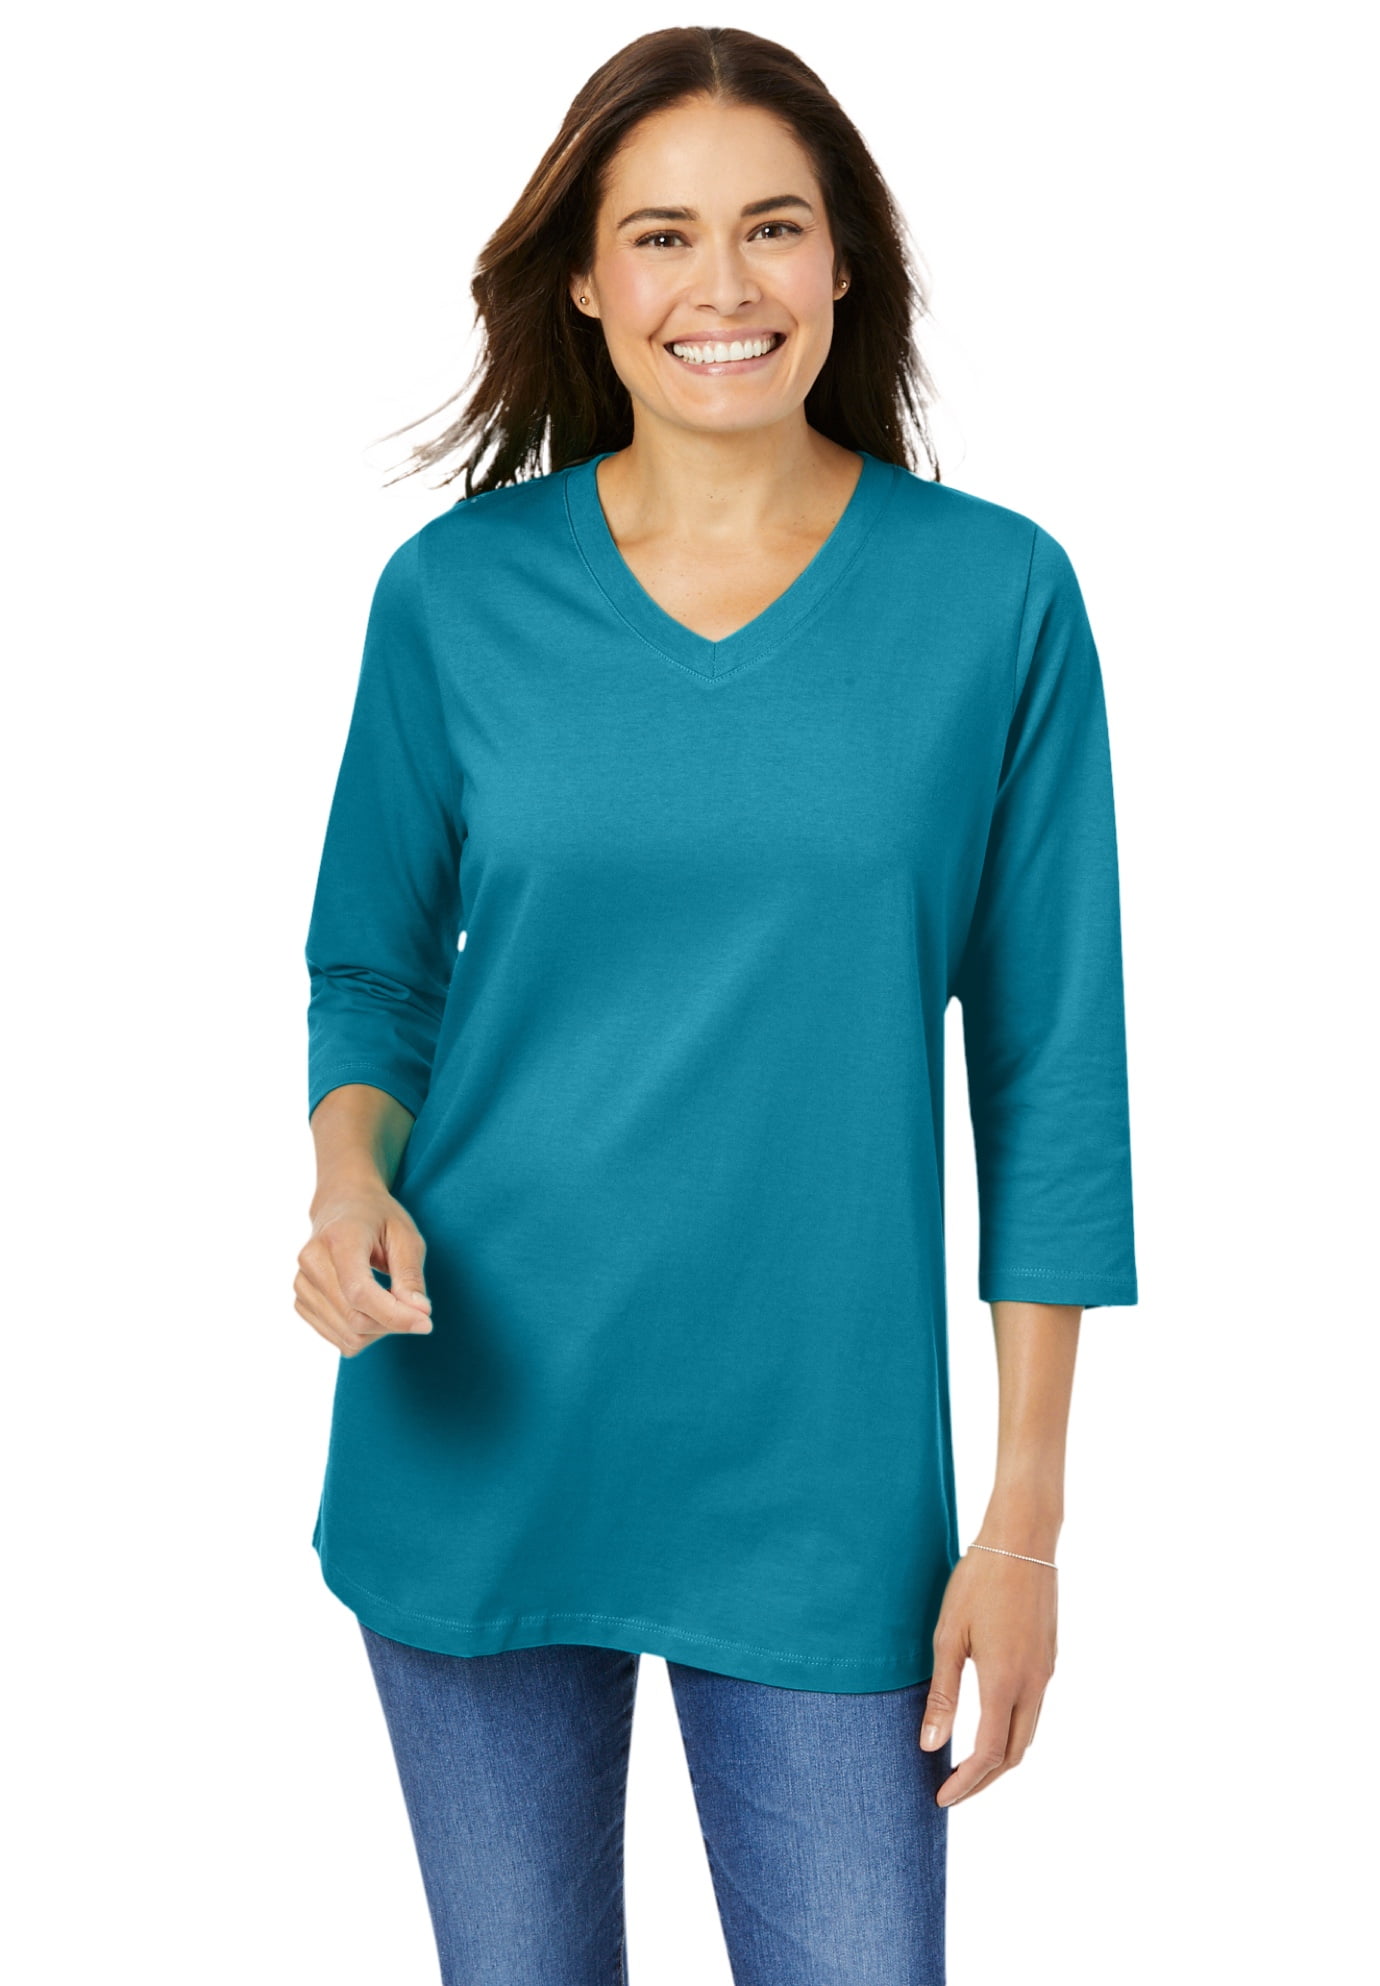 Woman Within Women's Plus Size Perfect Three-Quarter Sleeve V-Neck Tee Shirt 